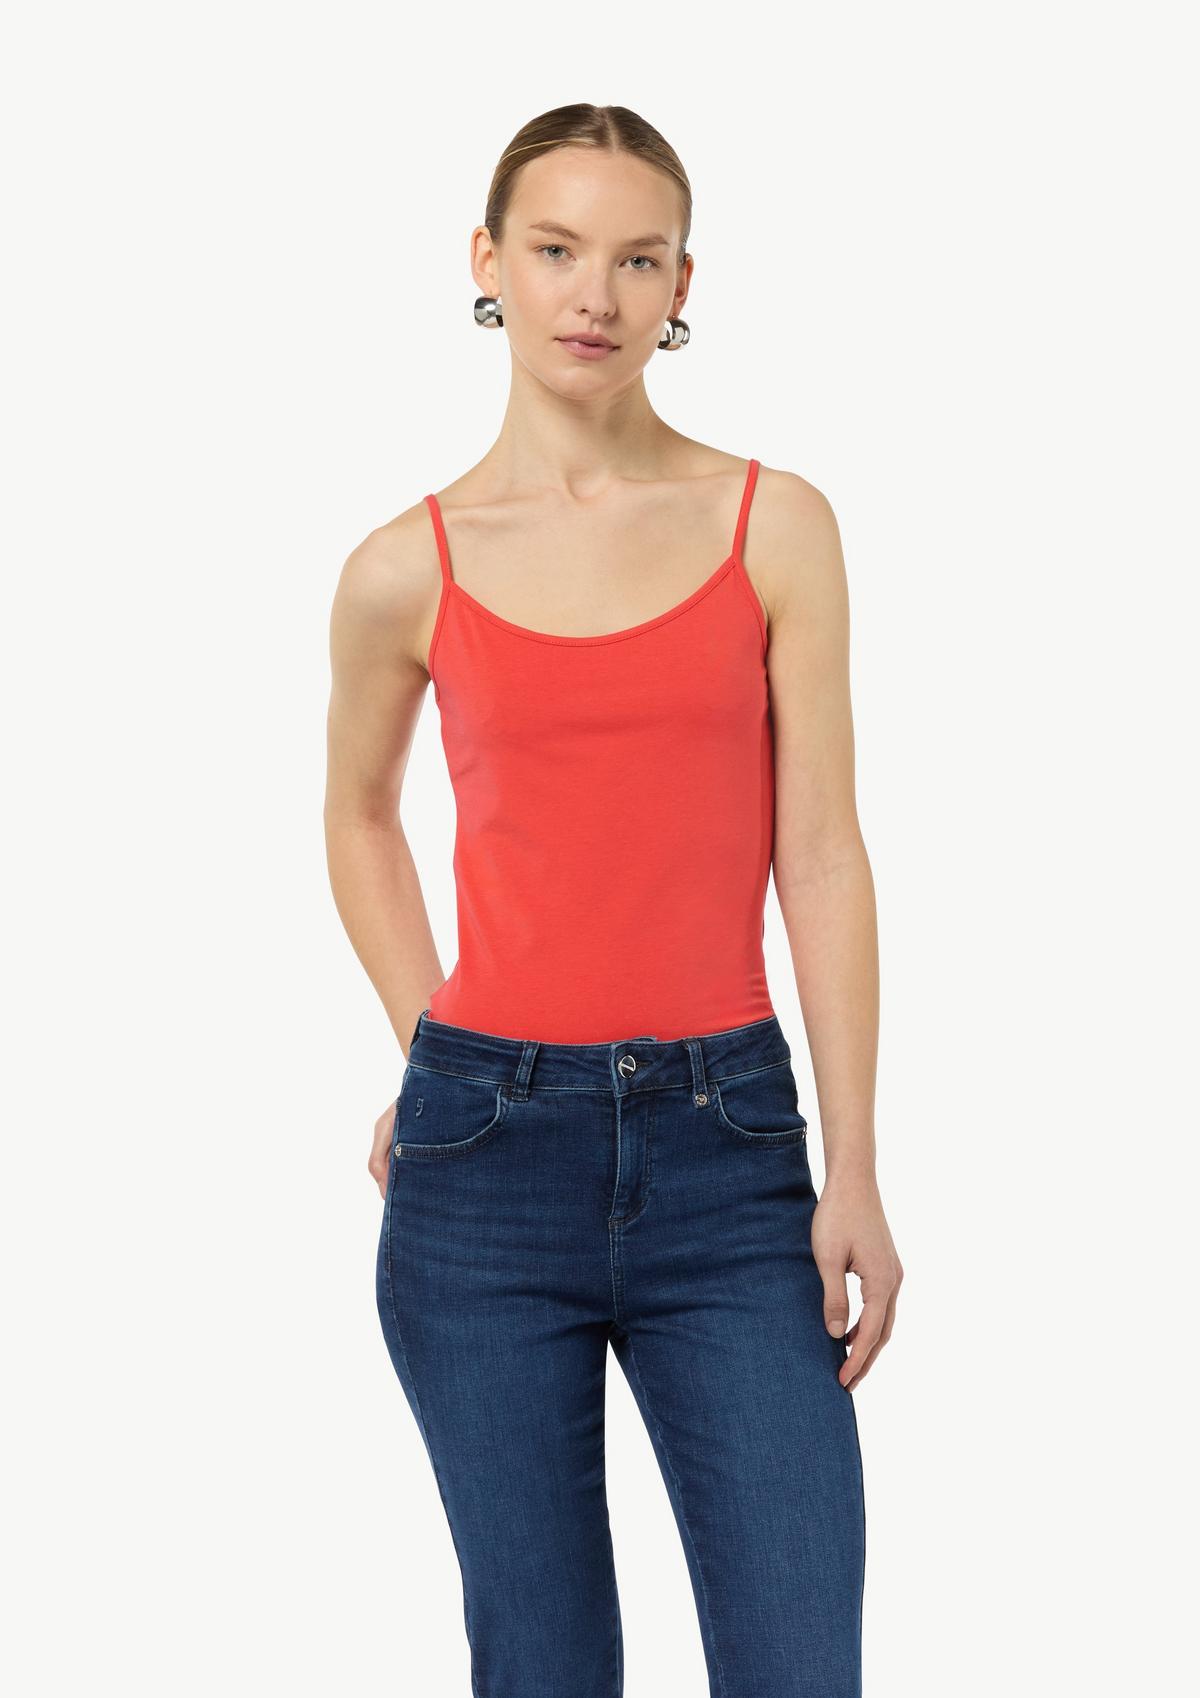 comma Slim-fitting jersey top with adjustable straps